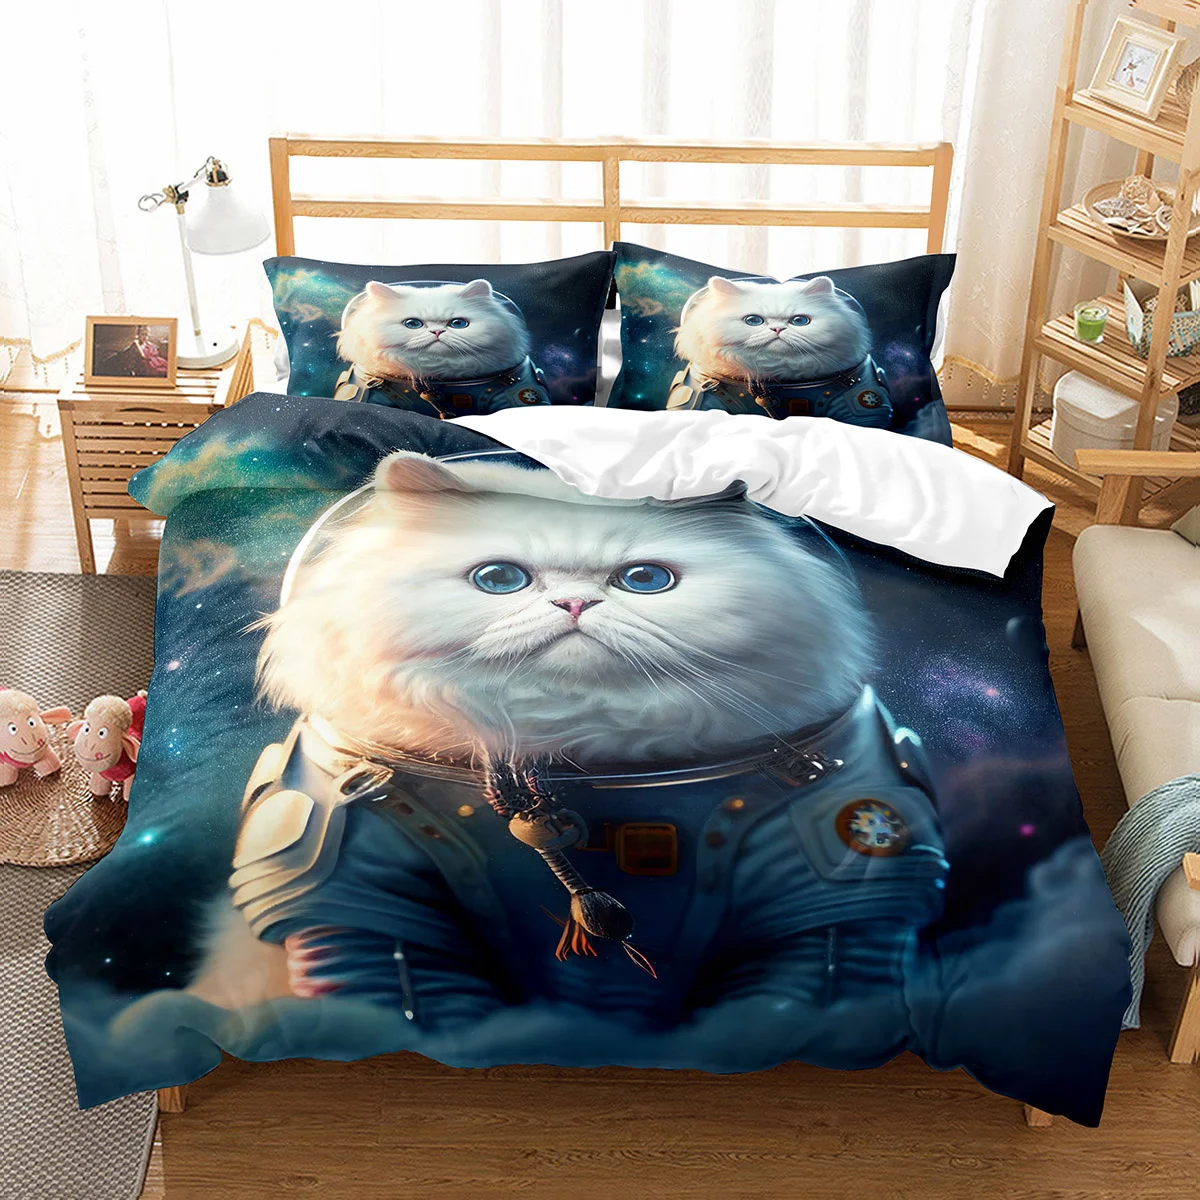 Space Cat King Queen Duvet Cover Cute Astronaut Kitty Bedding Set Universe Pet Animal Dog Quilt Cover Polyester Comforter Cover